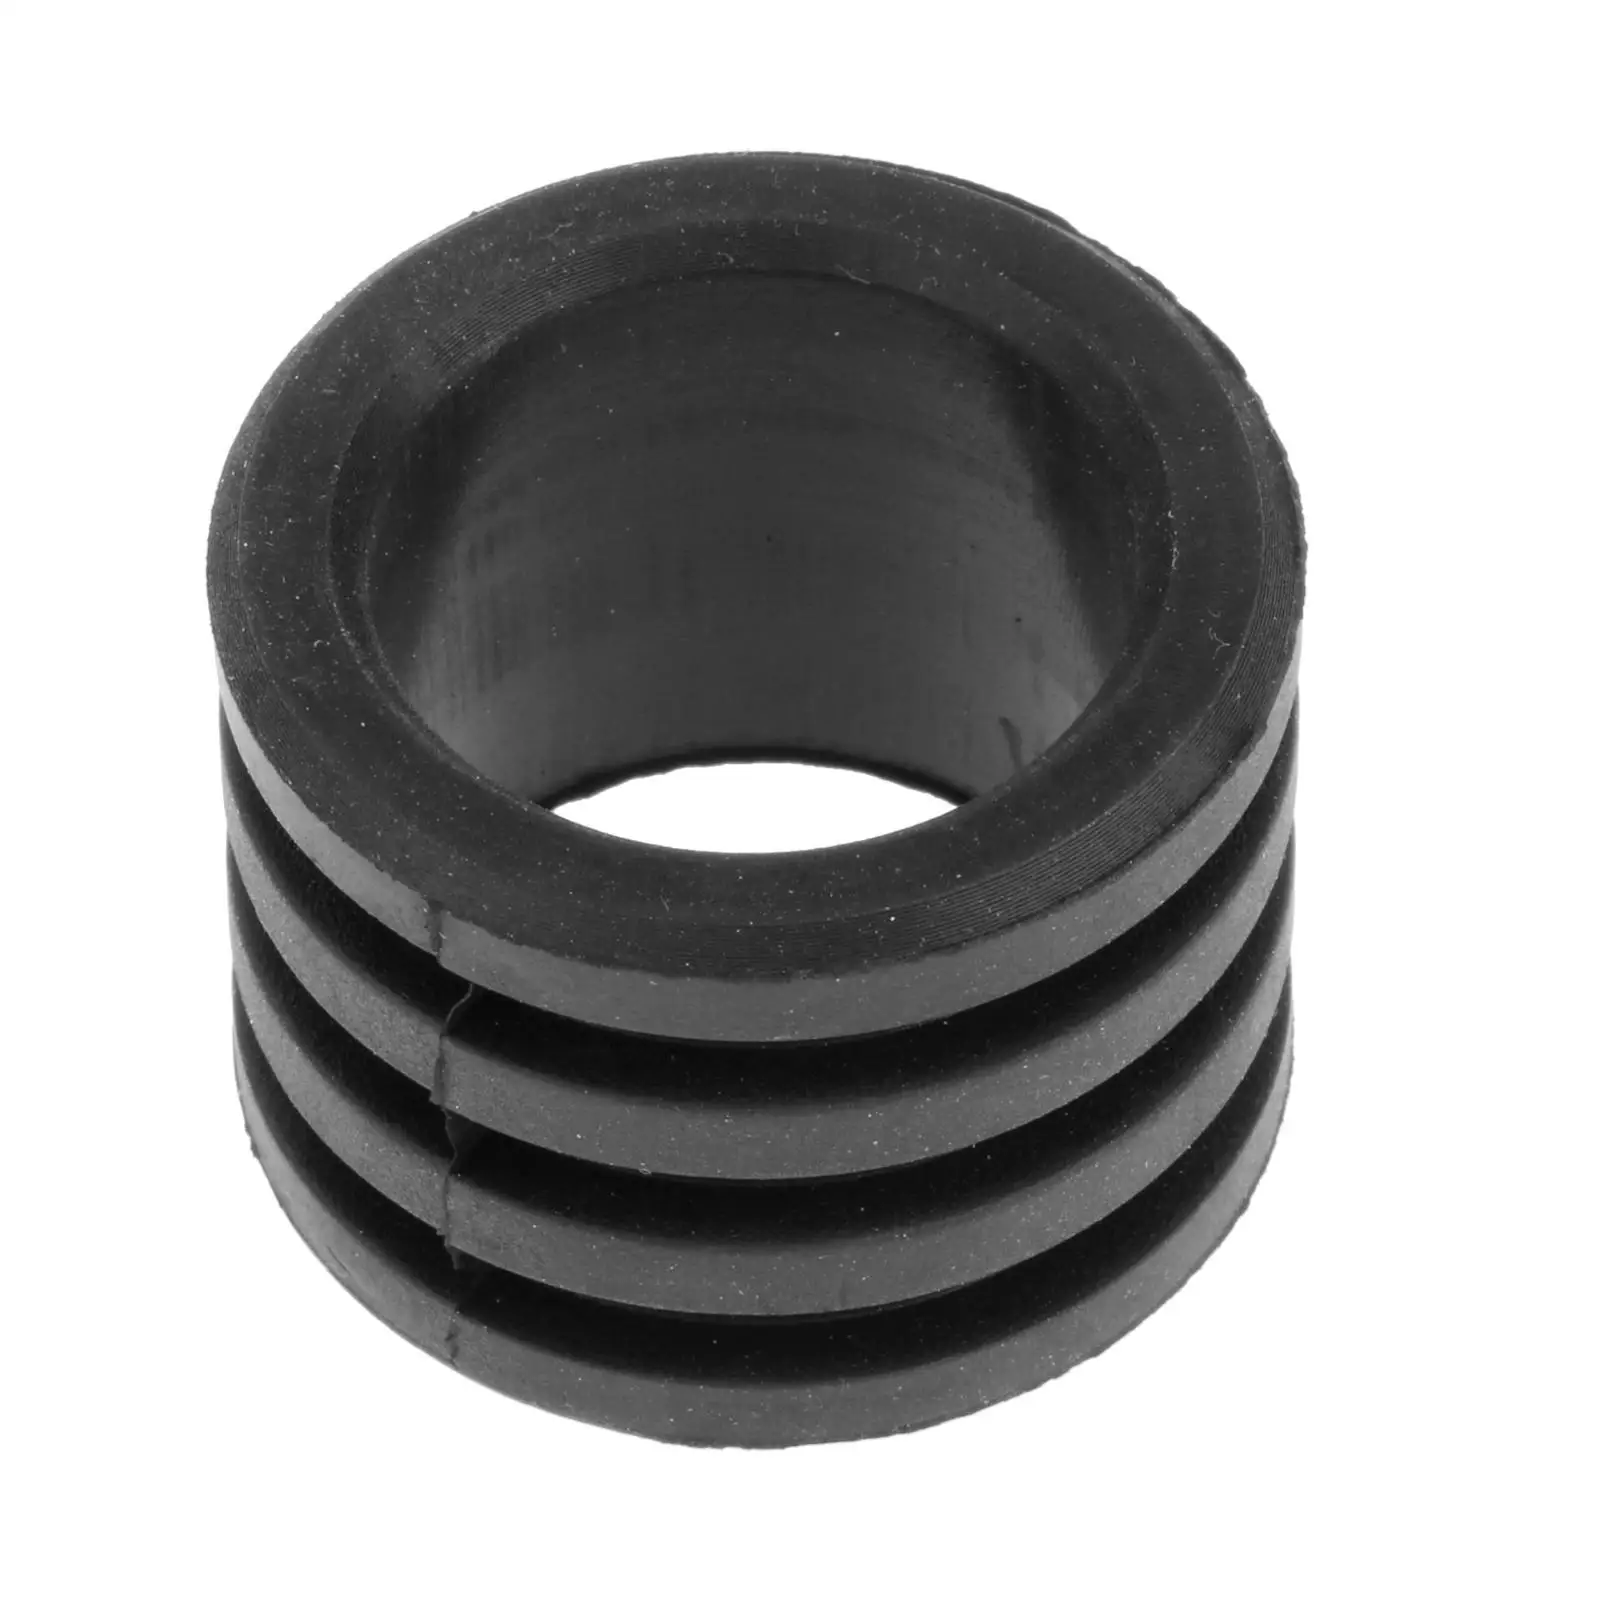 Exhaust Gasket Rubber Flange for  1984-07 CR250R CR 250 18365-KA4-730 ,Easy to Install